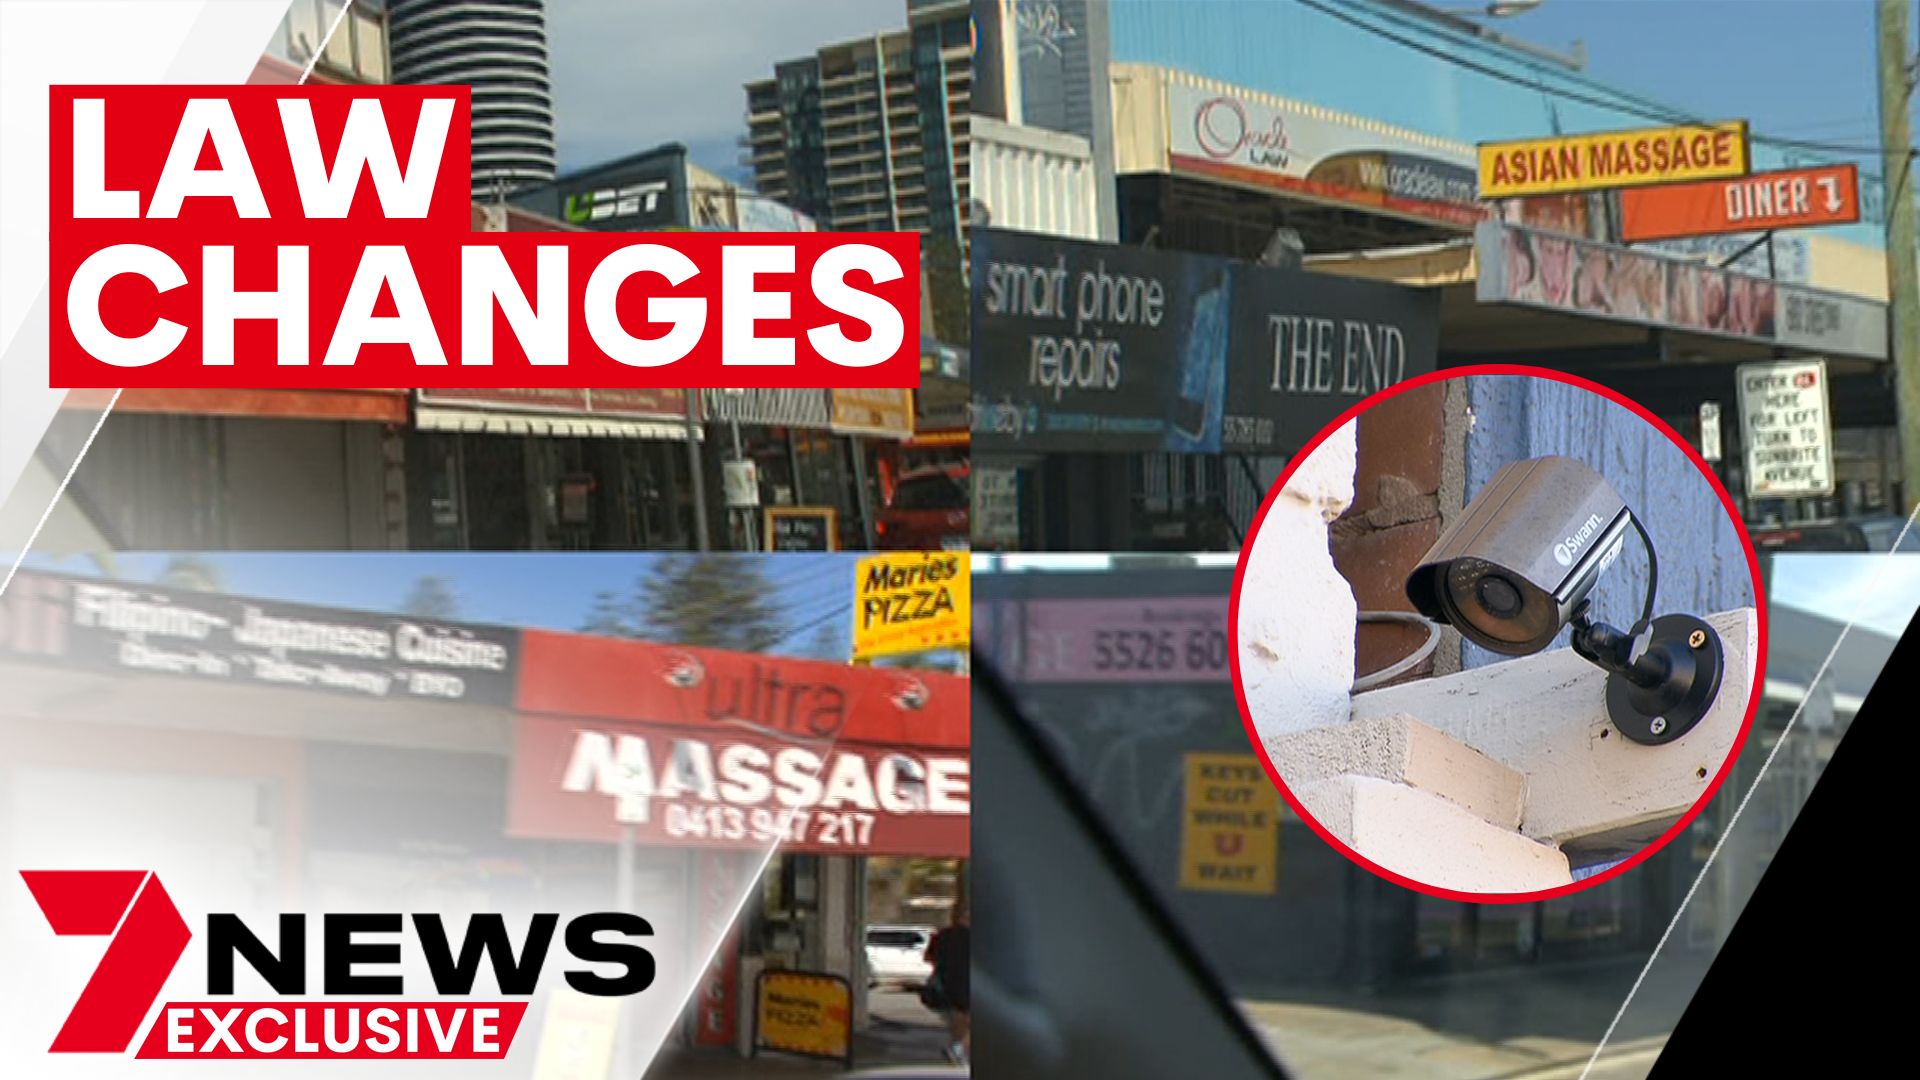 7news Brisbane On Twitter 7news Can Reveal The Sex Work Industry Will